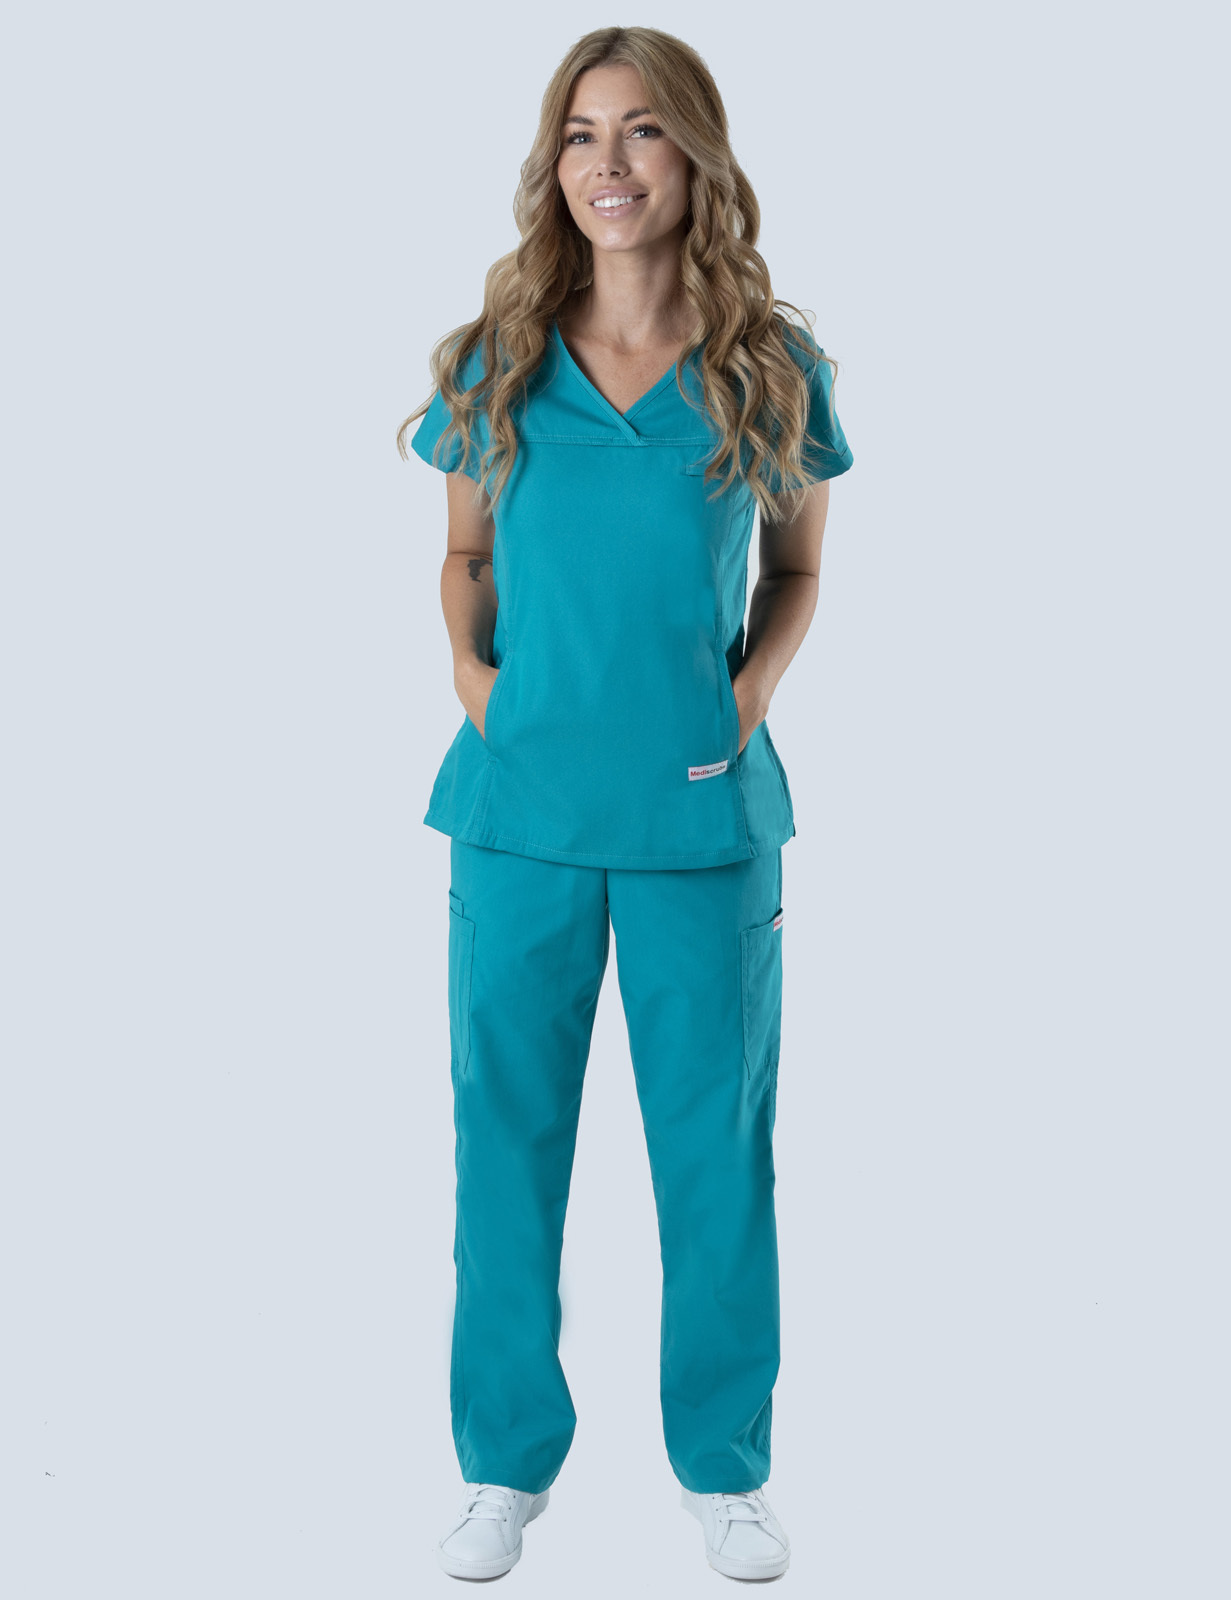 ECT Assistant in Nursing Uniform Set Bundle (Women's Fit Solid Top and Cargo Pants in Teal + Logos)       